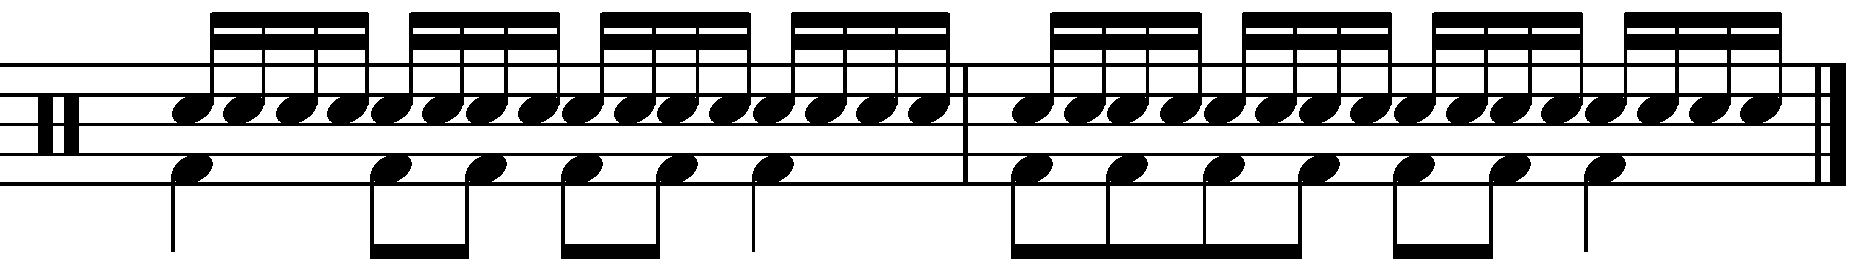 A foot speed exercise using eighth note feet